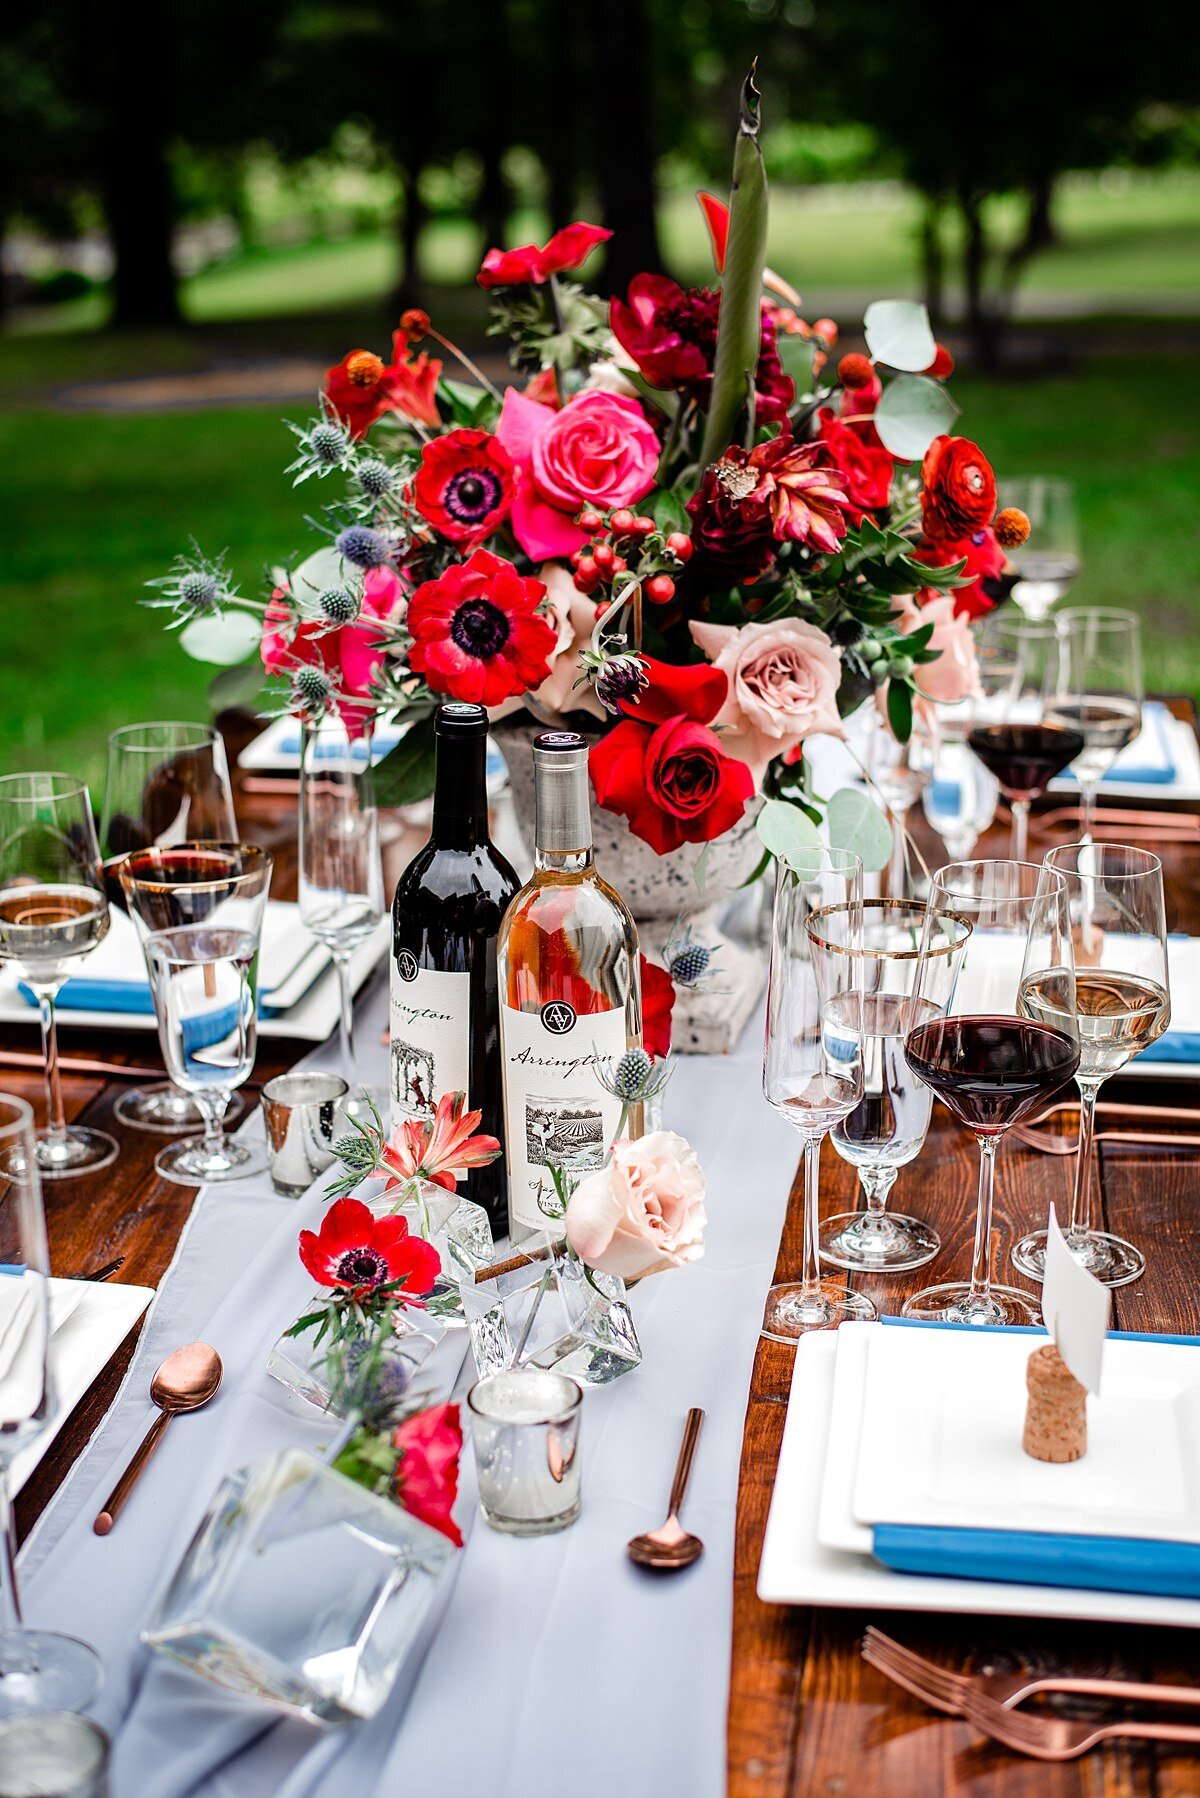 A farm table with a large red floral centerpiece featuring blush roses, red roses, red anthurium, red ranunculus, red anemones, blush and red protea, blue thistle, hypericum berries, red cascading dianthus and assorted greenery. The dark wood farm table is also set with a dove gray sheer organza table runner and cube shaped glass bud vases with red and blush flowers. The matte copper flatware is set on either side of the square white dinner plates that are topped with salad plates wrapped in teal linen napkins, and white square dessert plates. Wine cork seating card stands are on each plate with a white seating card with teal calligraphy. The table is also set with red and white tulip shaped long stemmed wine glasses and footed crystal water goblets with a gold rim. Bottles of Arrington Vineyards Stag's White, and Red Fox Red wines are set on the table.